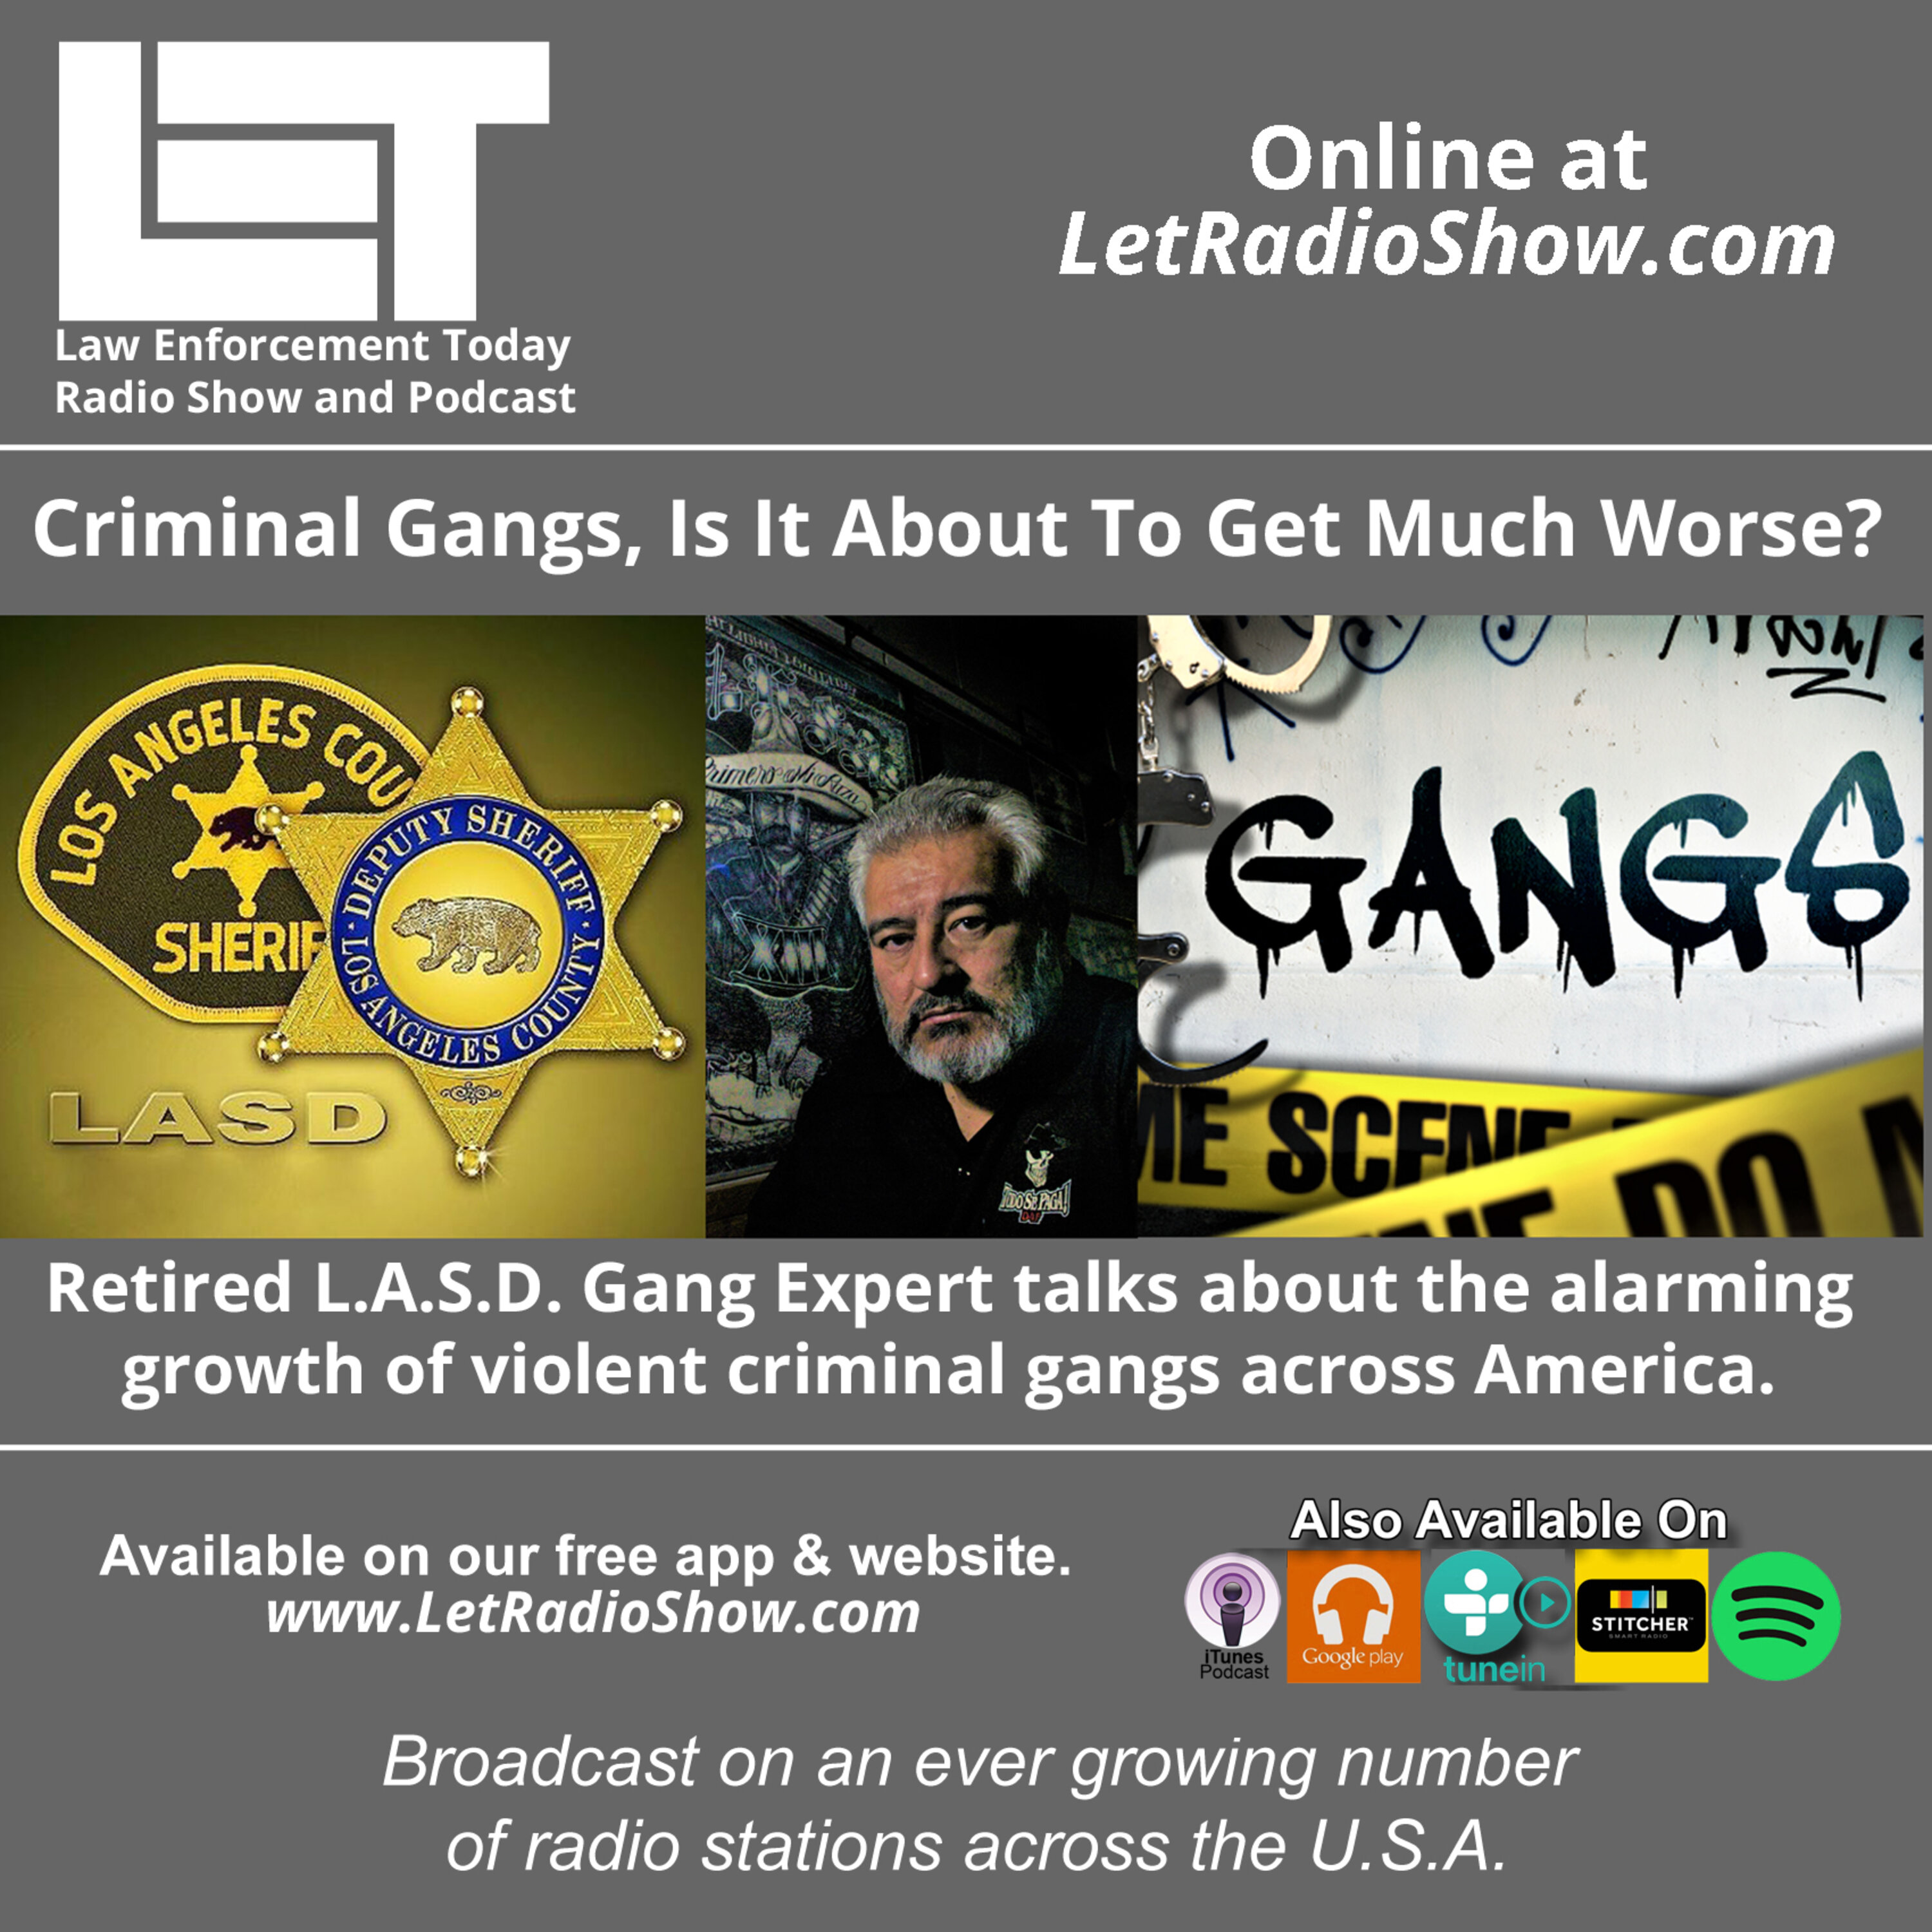 S5E72: Criminal Gangs, Is It About To Get Much Worse?